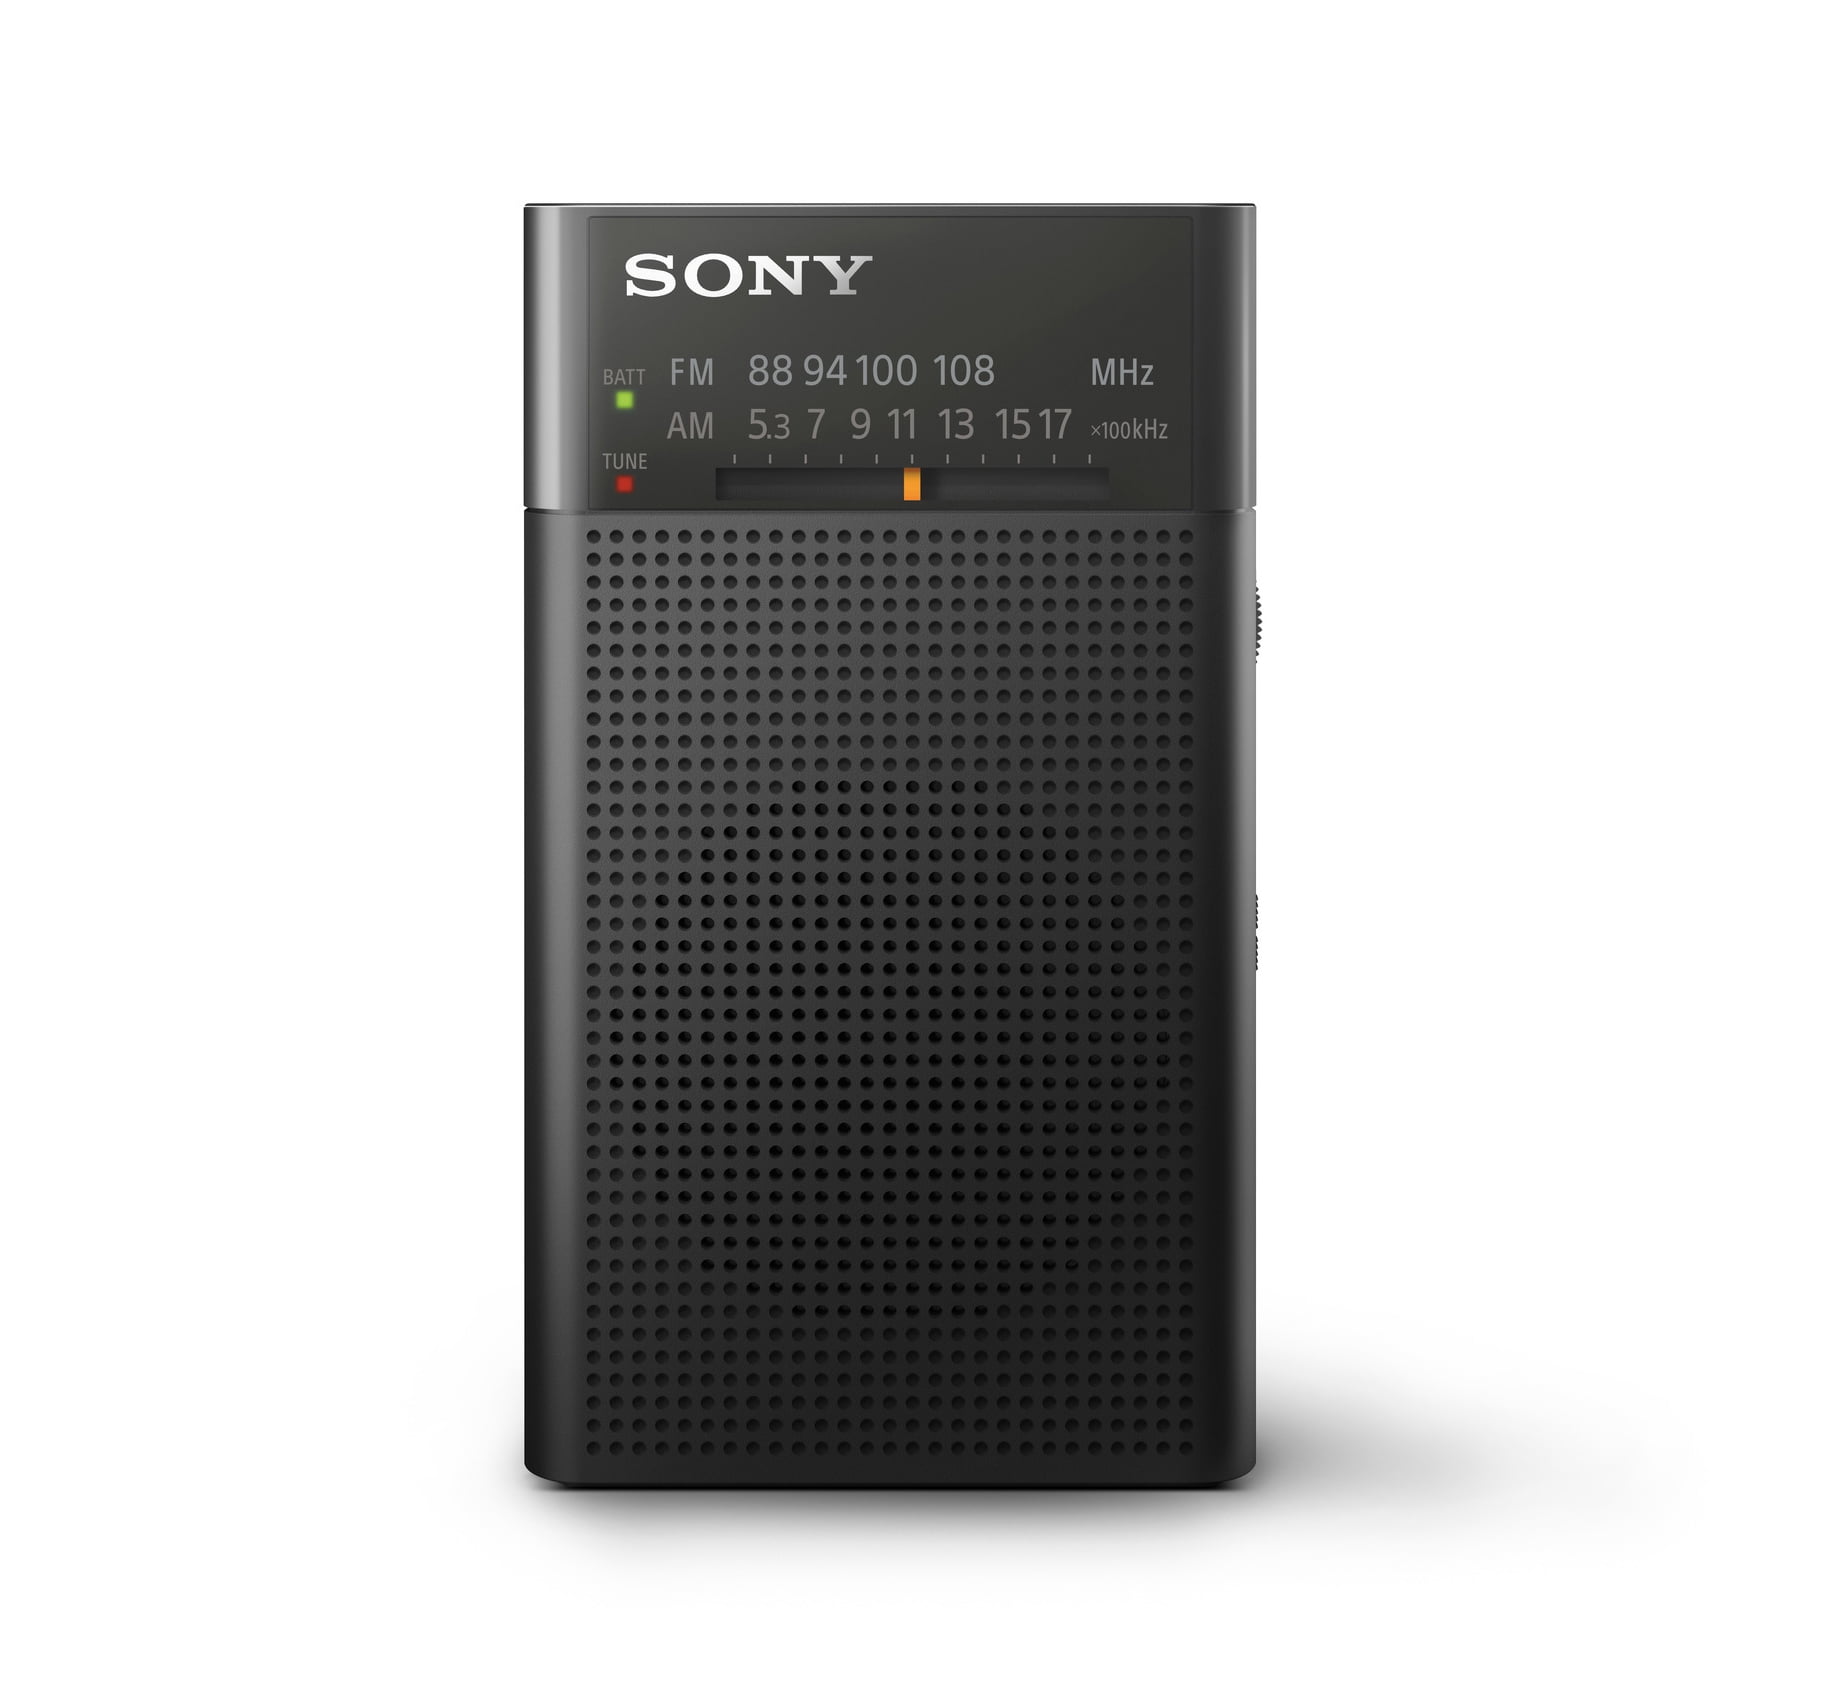 Sony ICF-P27 Portable Radio with Speaker and AM/FM Tuner